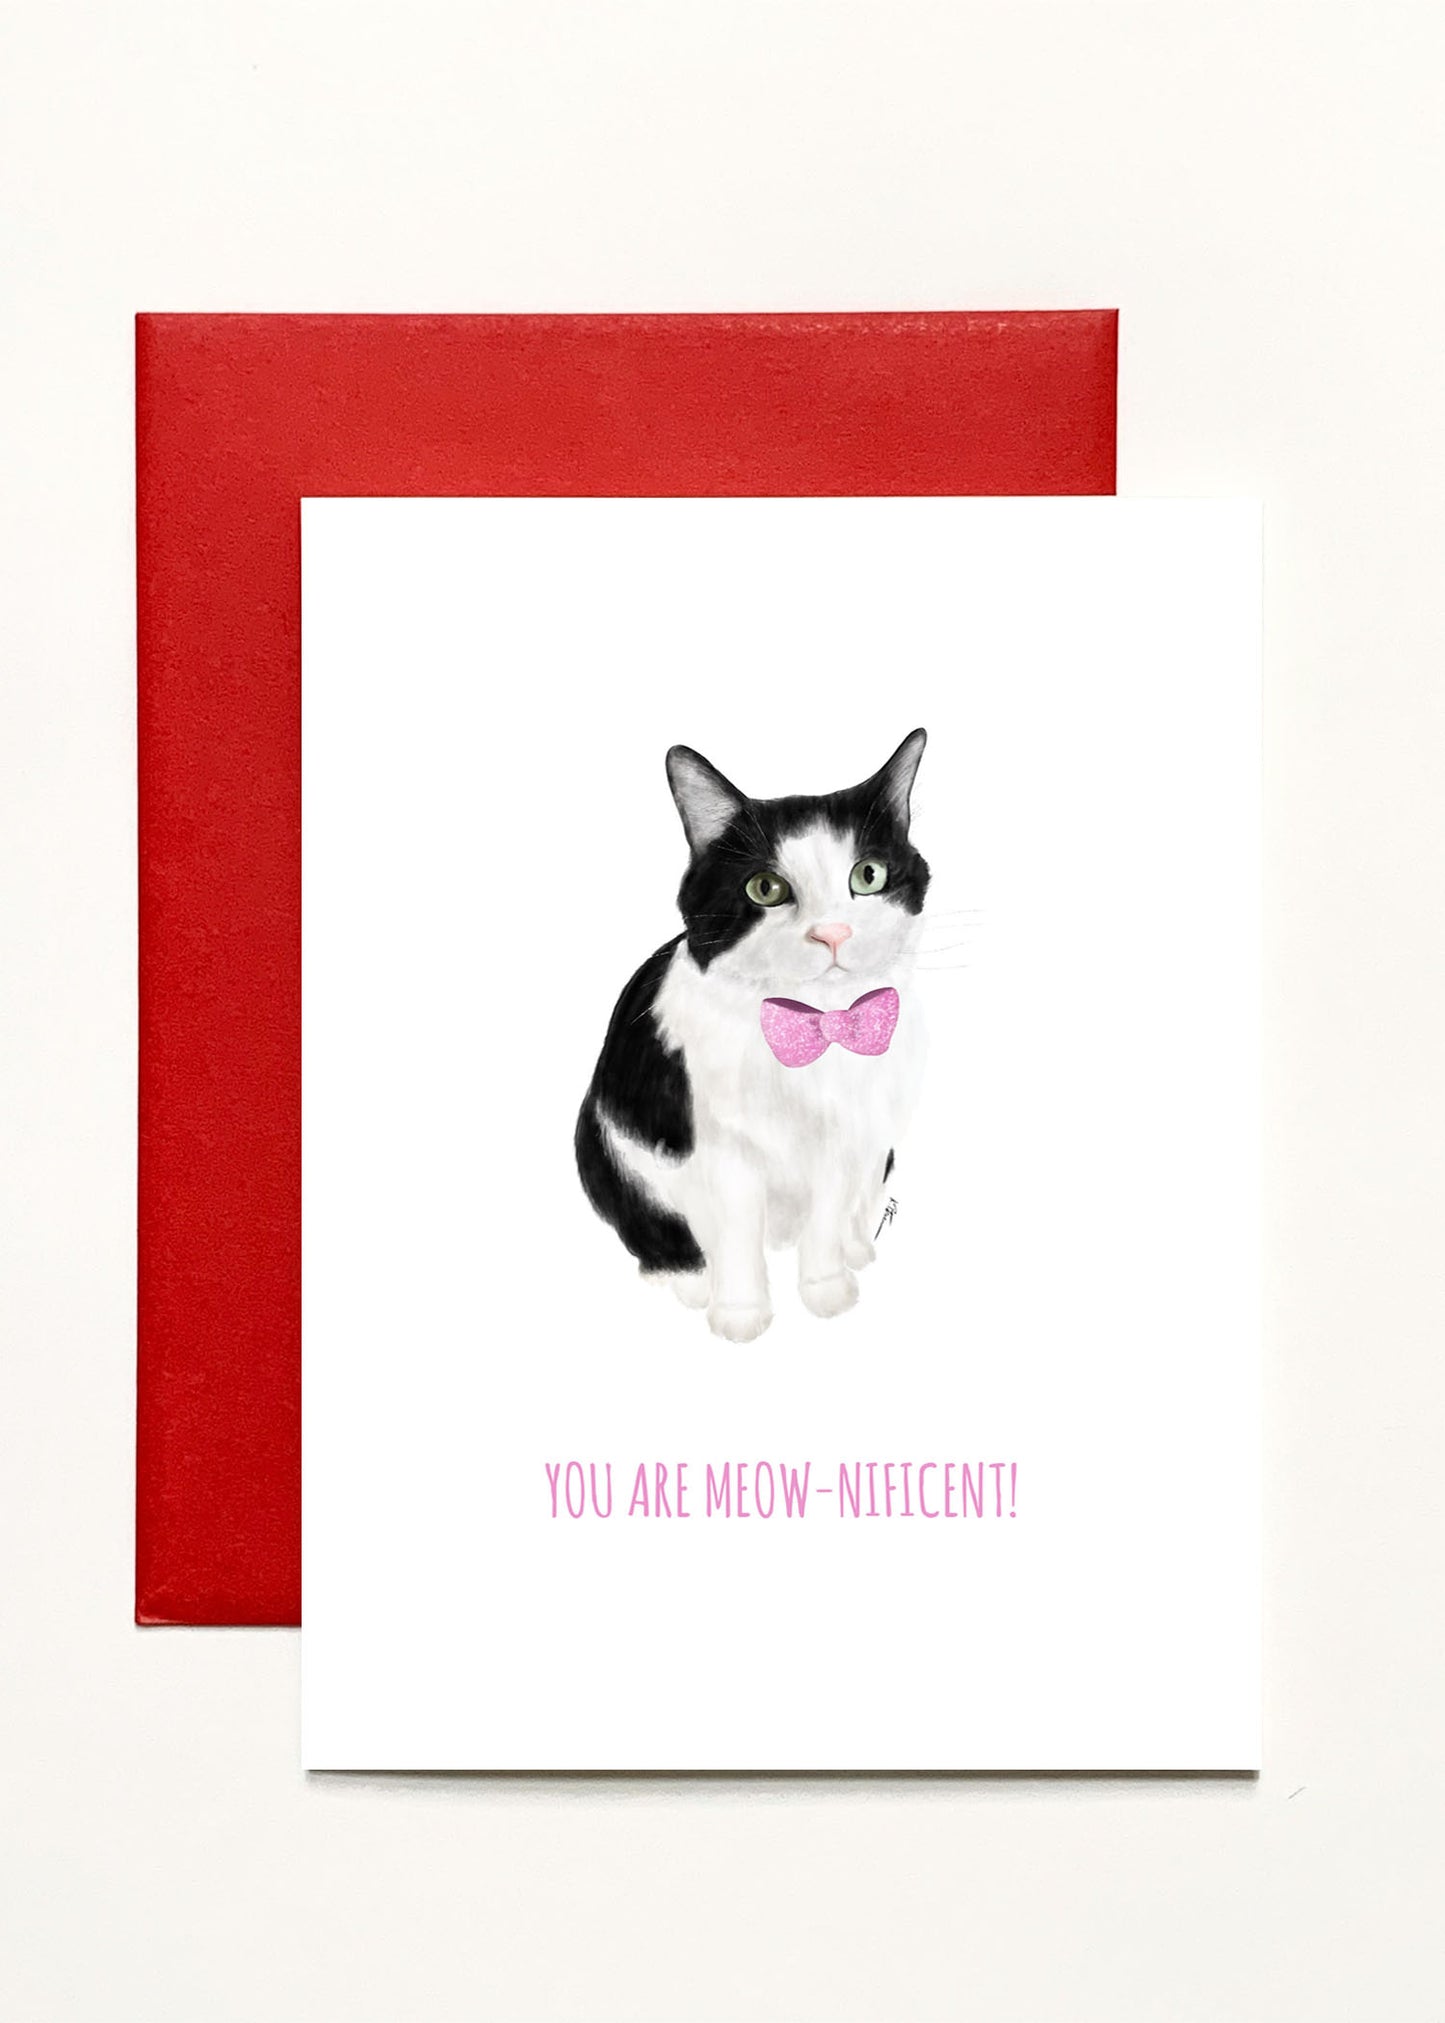 You Are Meow-nificent!